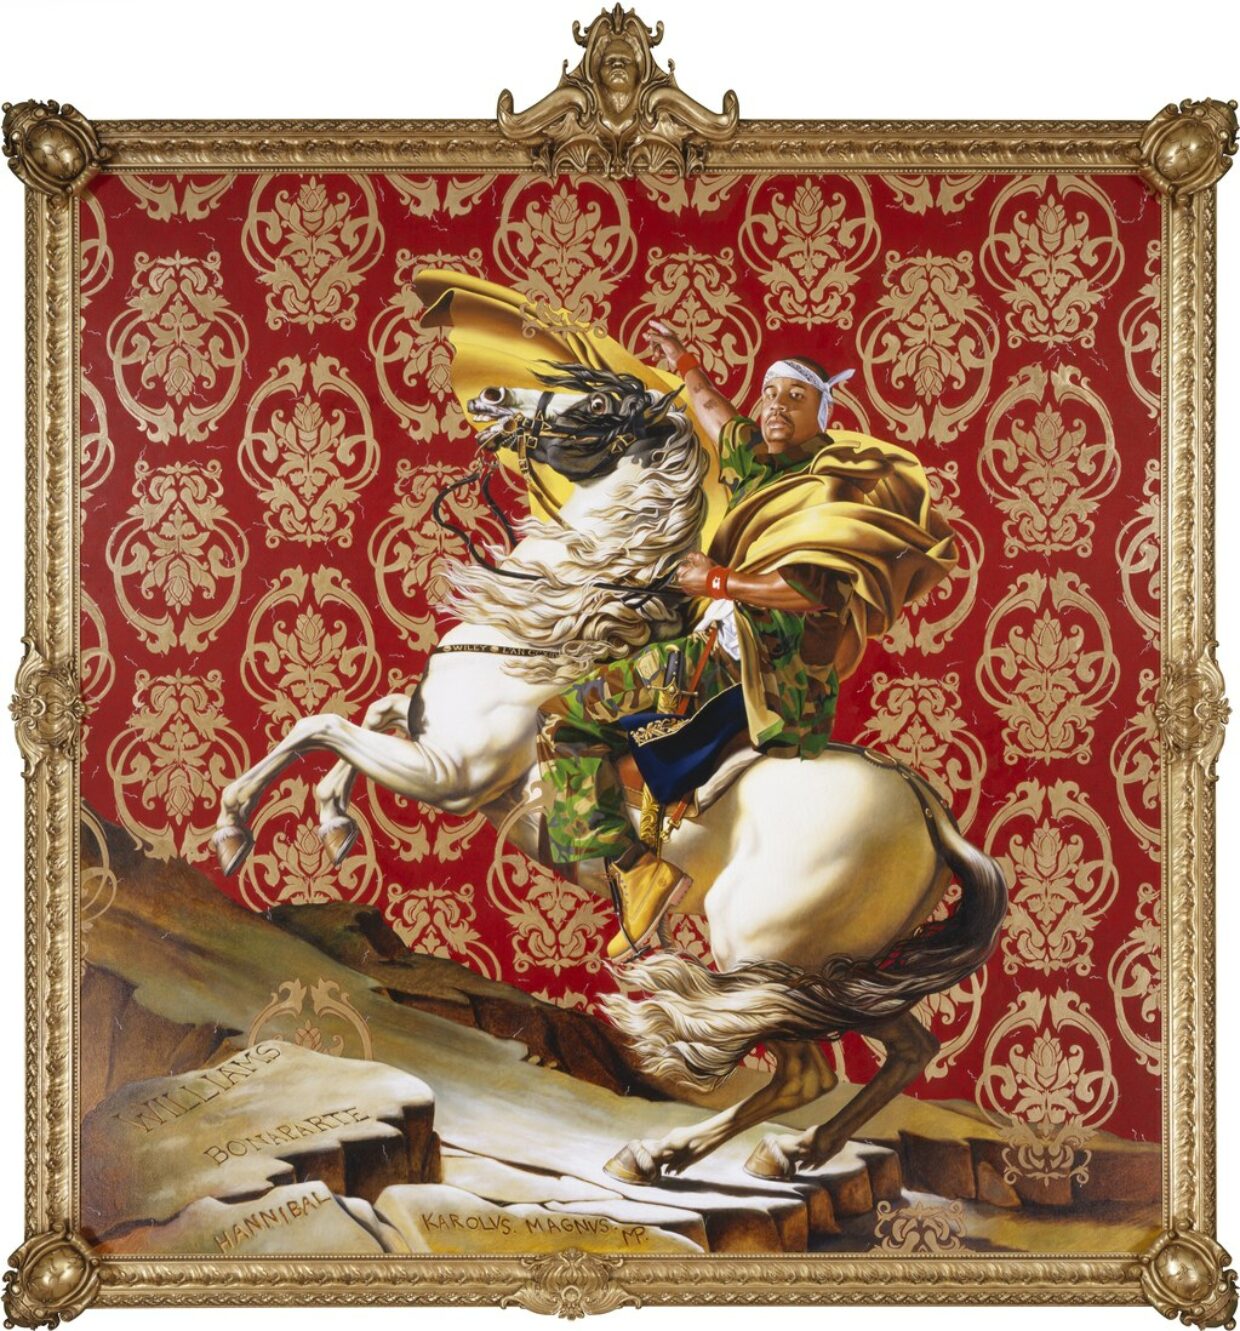 Kehinde Wiley on Painting Masculinity and Blackness, from President Obama to the People of Ferguson | 3